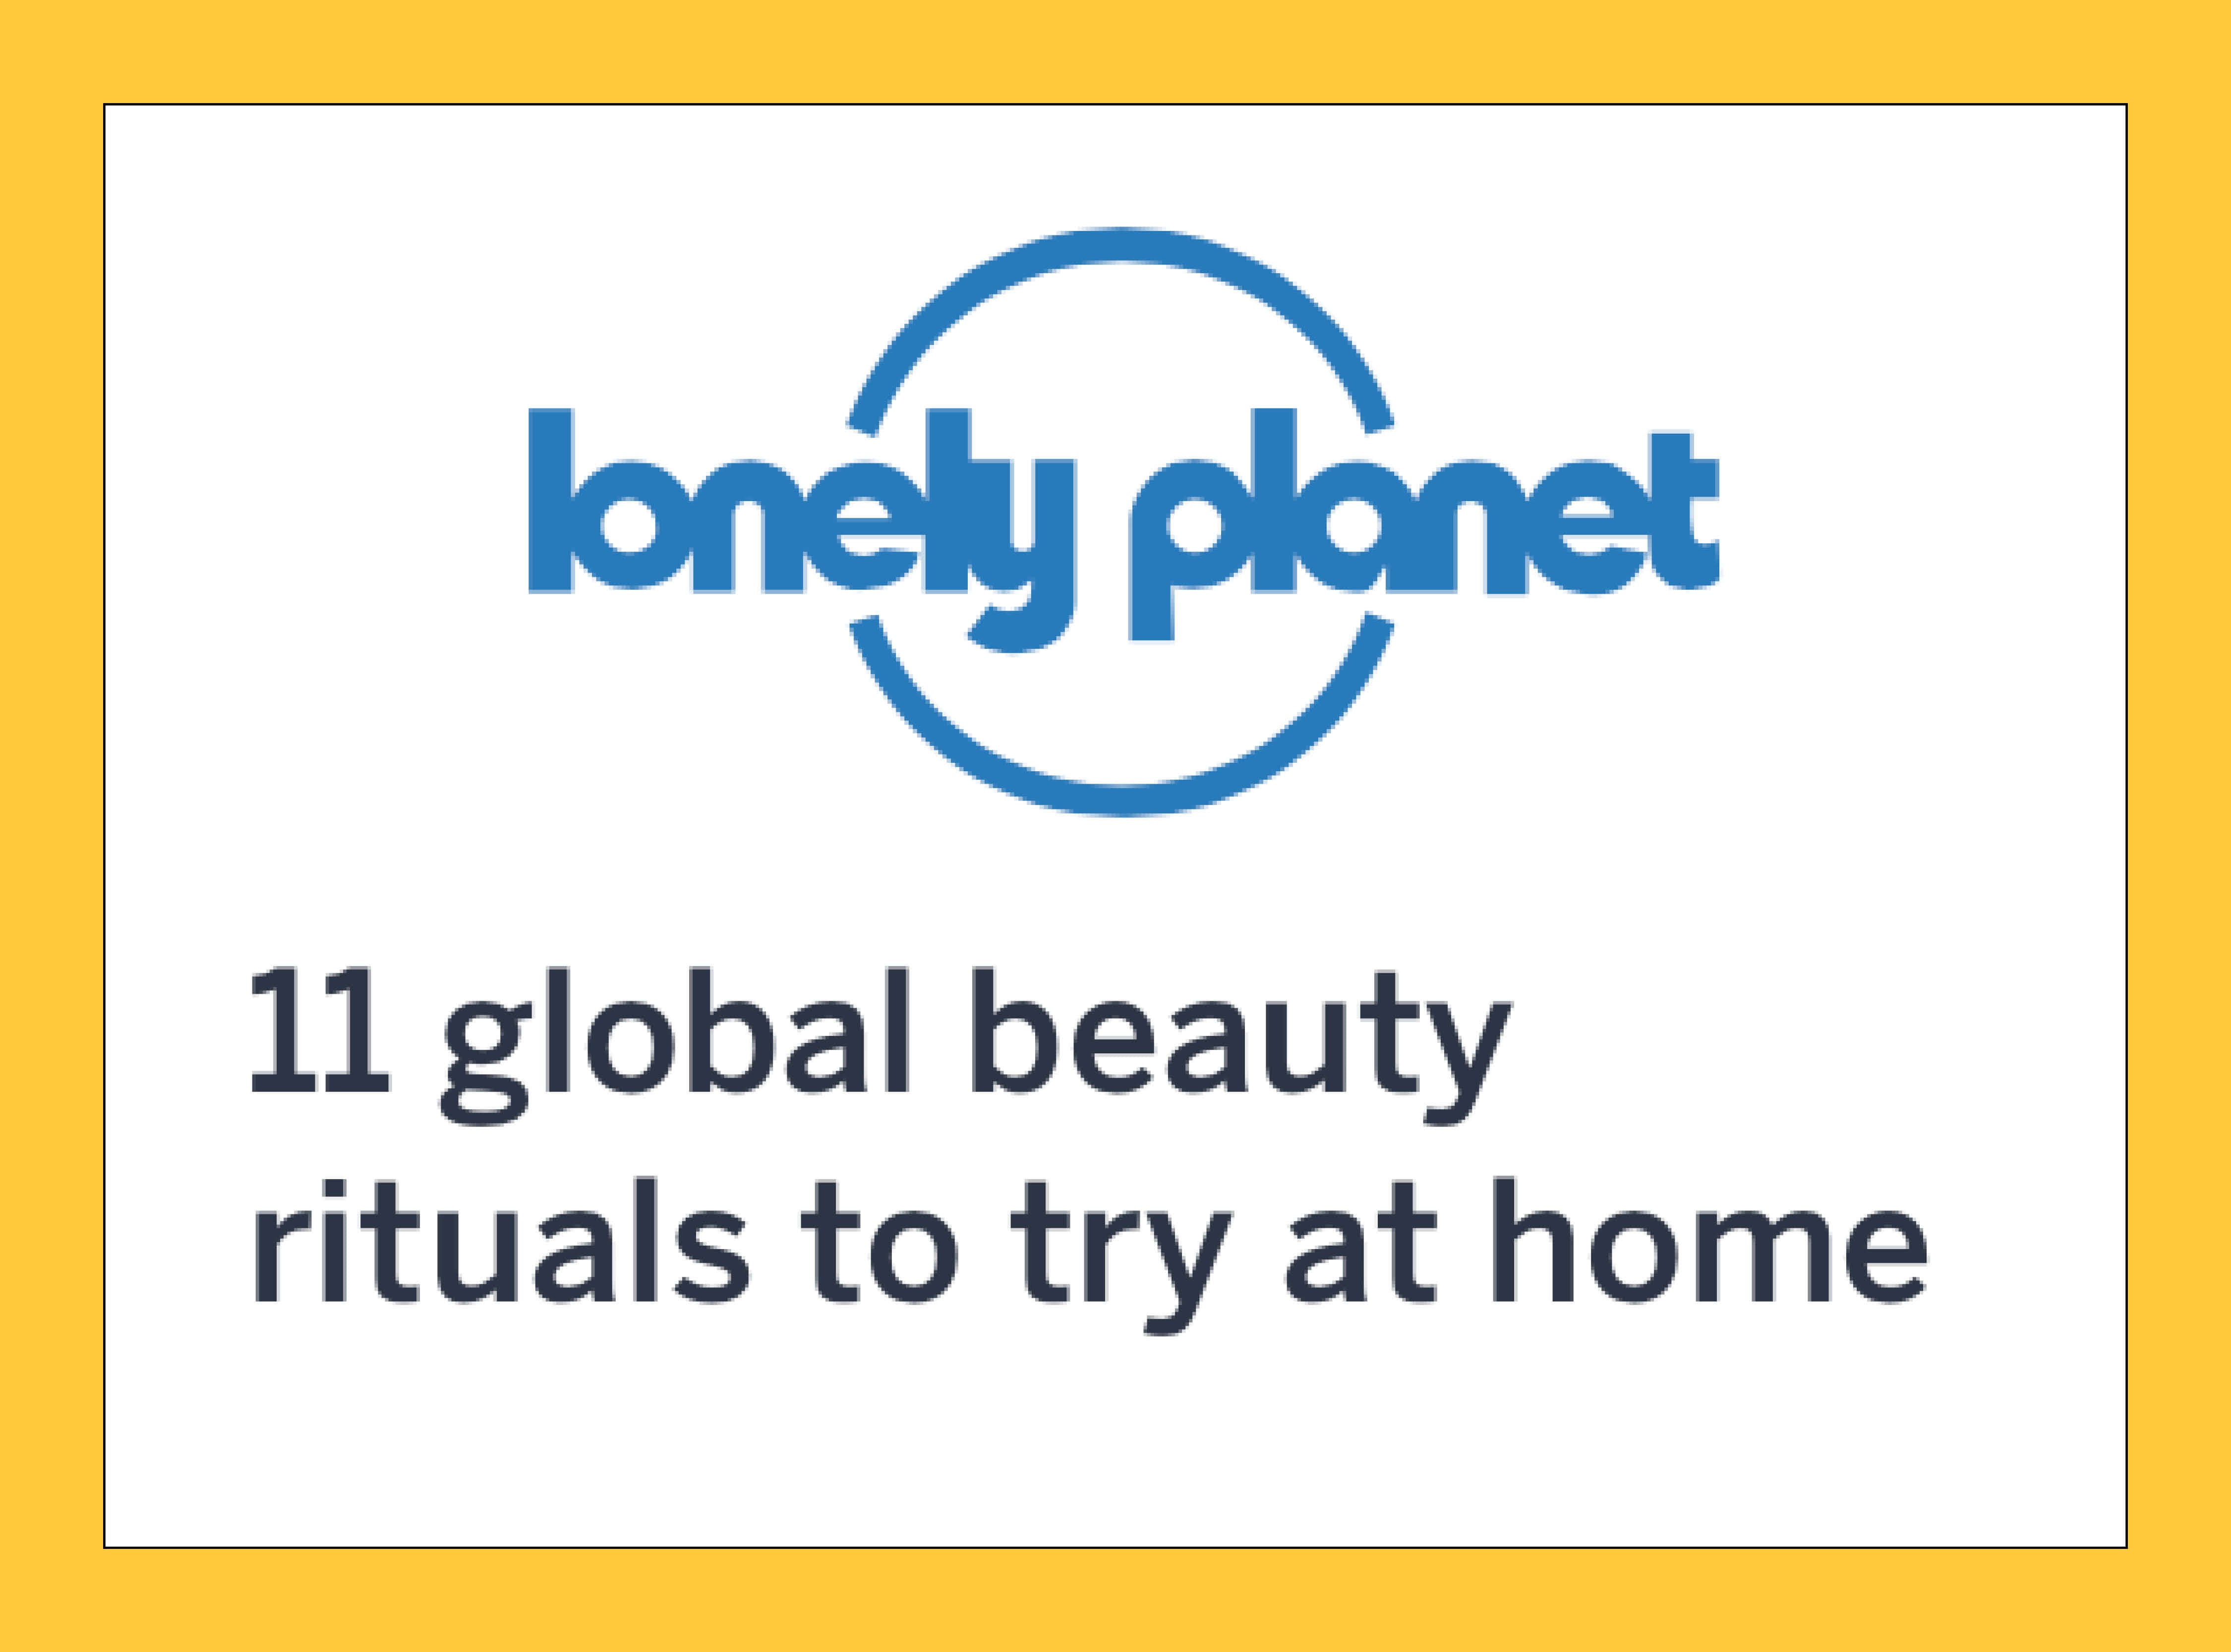 Lonely Plant highlights global beauty rituals to try at home